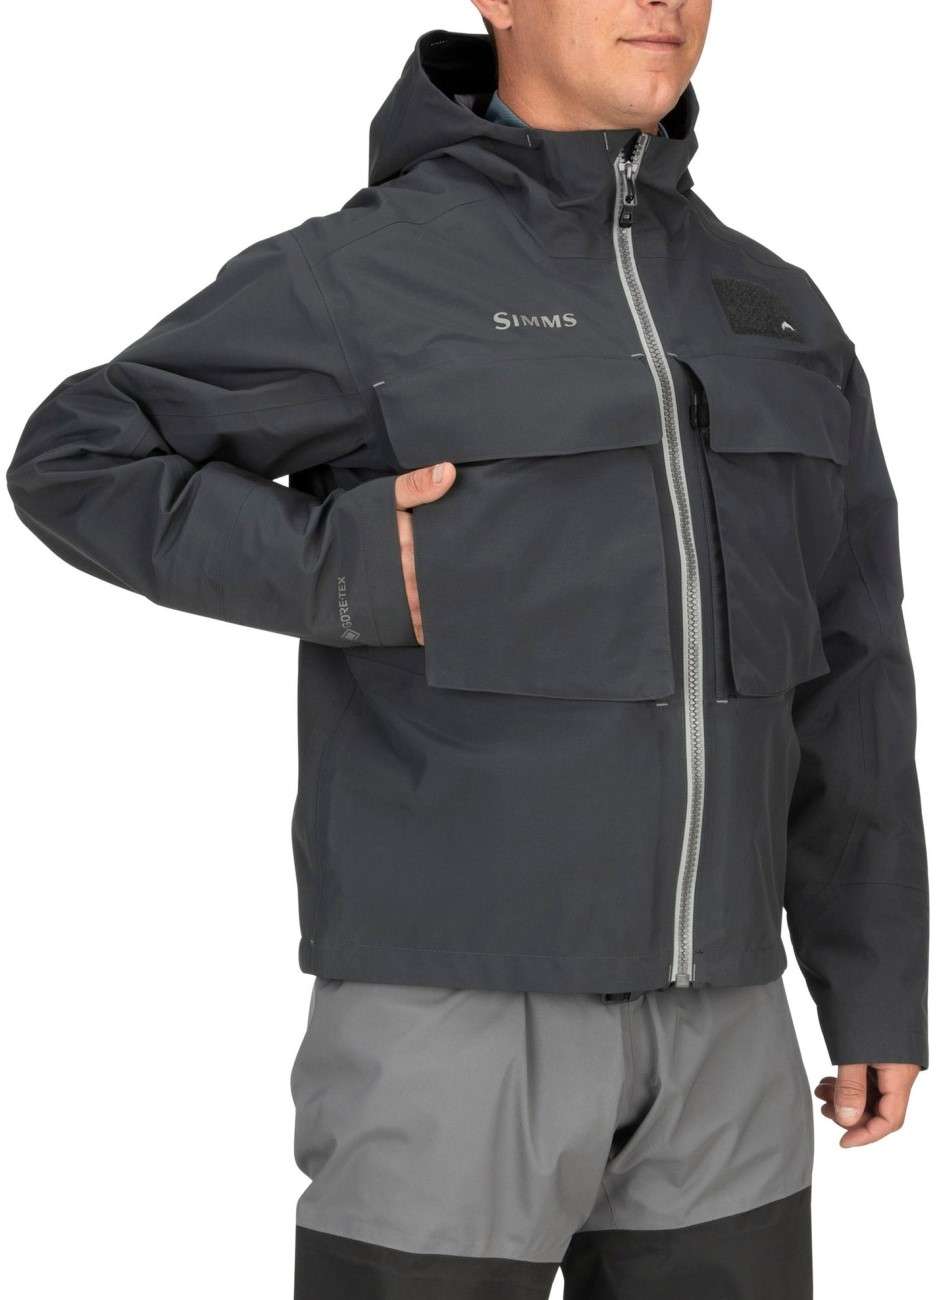 Simms Mens Guide Classic Wading Jacket - Cb - XXL - TackleDirect